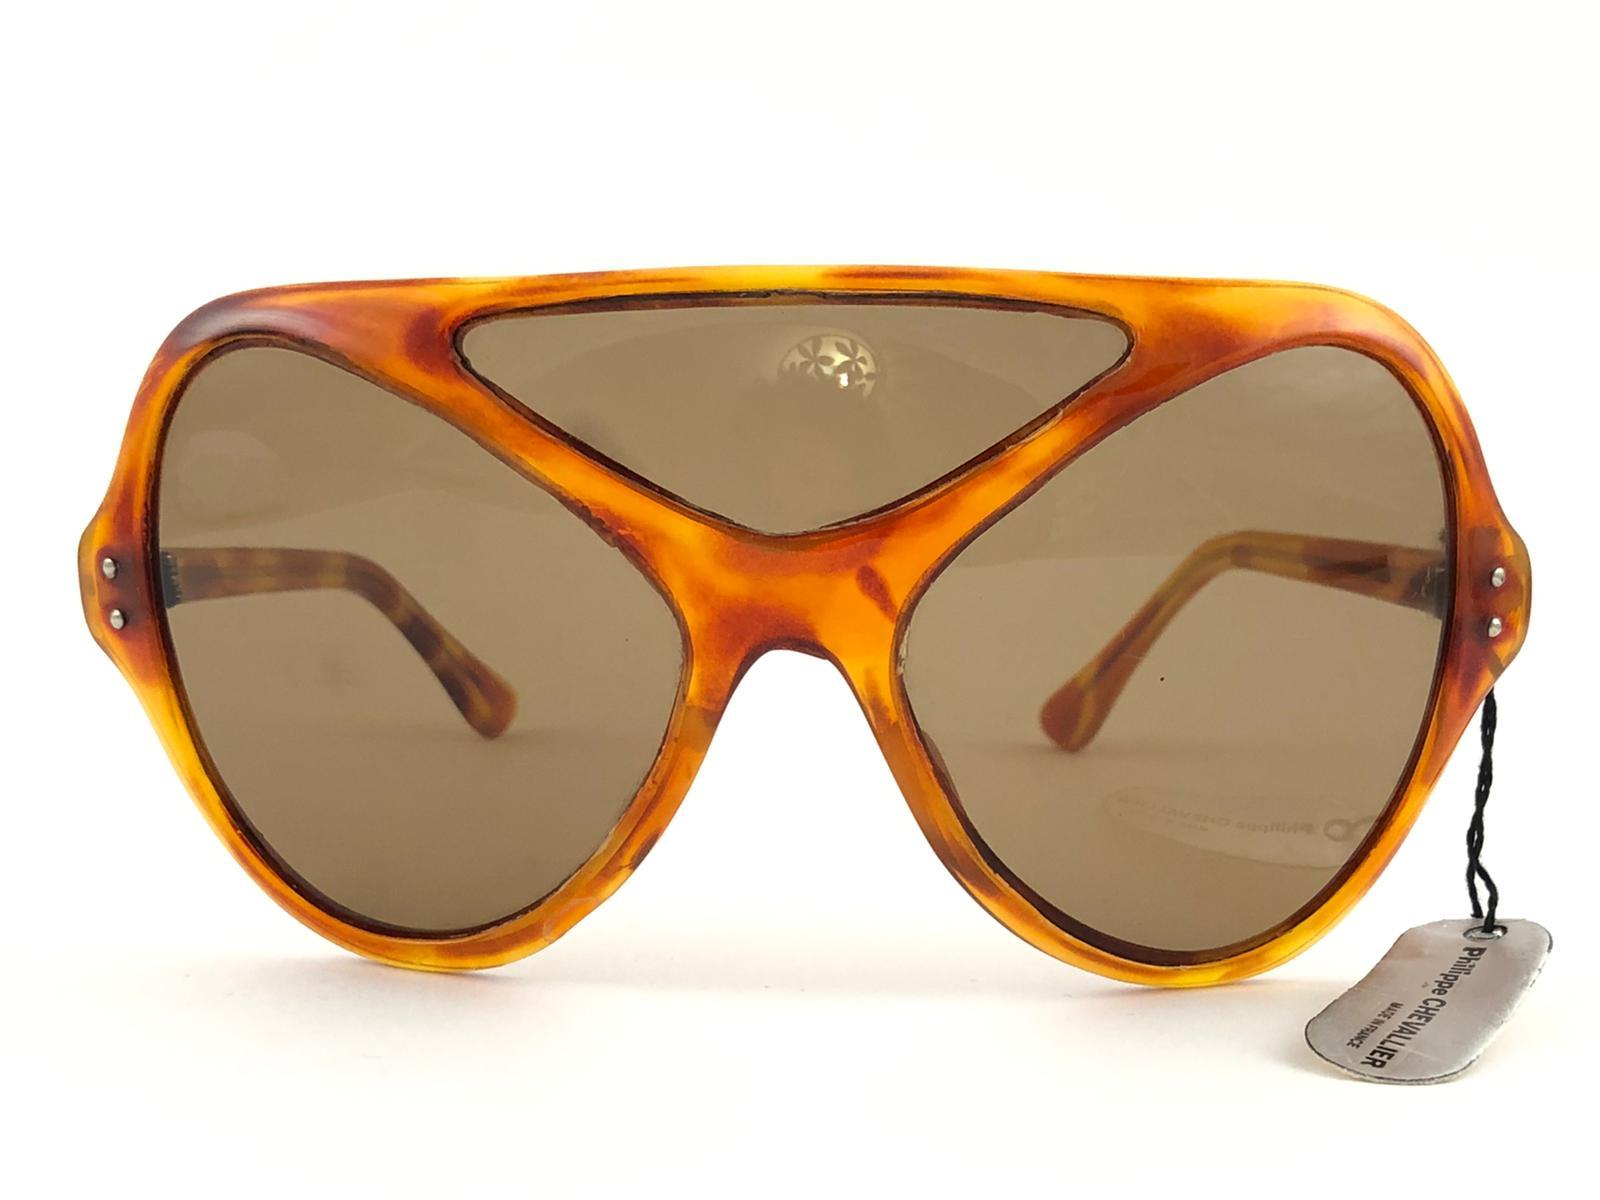 New rare collector's item vintage Philippe Chevalier light tortoise oversized sunglasses with spotless medium brown three lenses. From the same series as the ones worn by Miles Davis.
A superb find. 

Please notice this item may show minor sign of